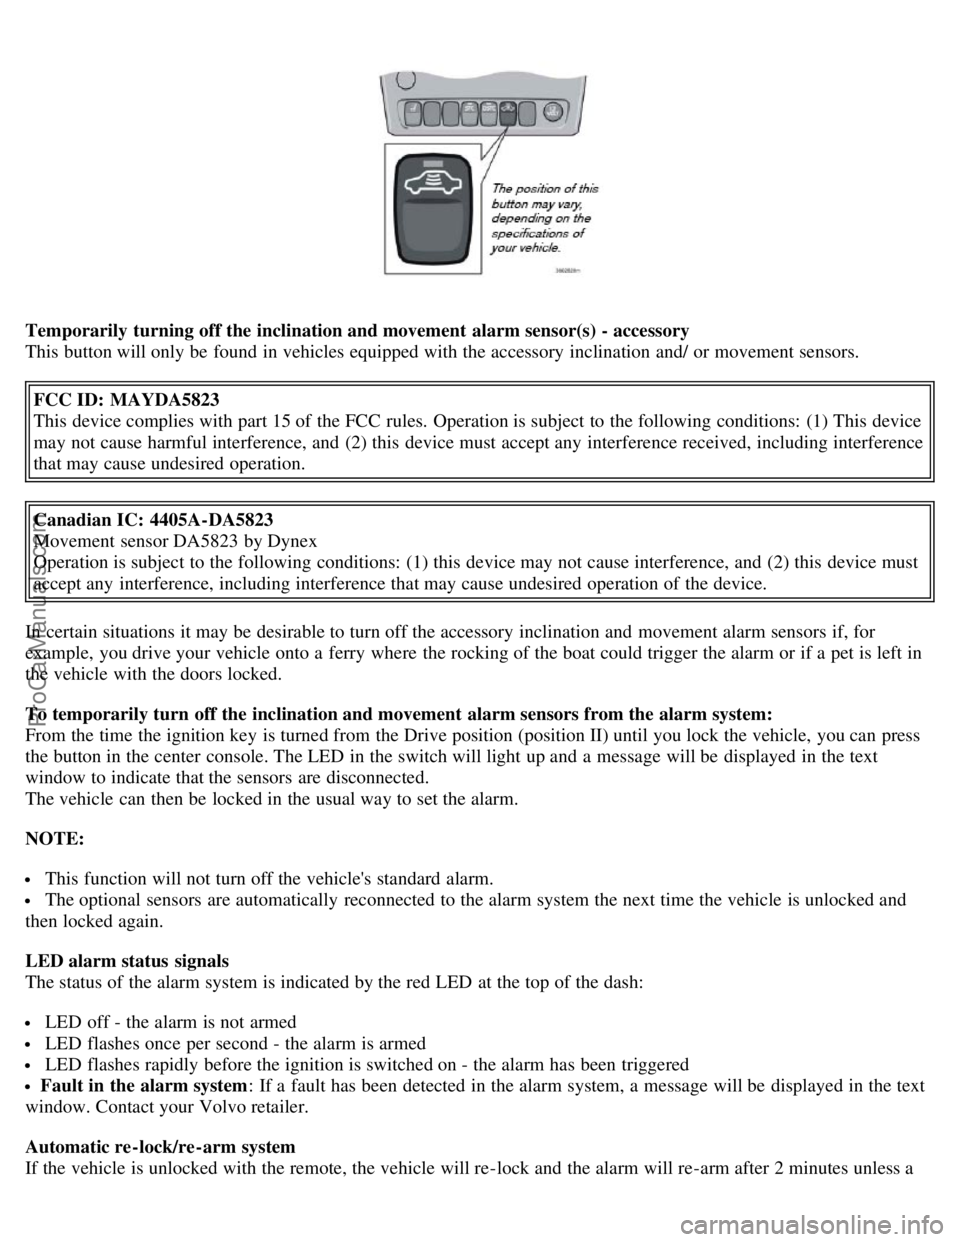 VOLVO S60 2007  Owners Manual Temporarily  turning off the inclination and movement  alarm sensor(s) - accessory
This button will only be  found in vehicles equipped with the accessory  inclination and/ or movement sensors.FCC ID: